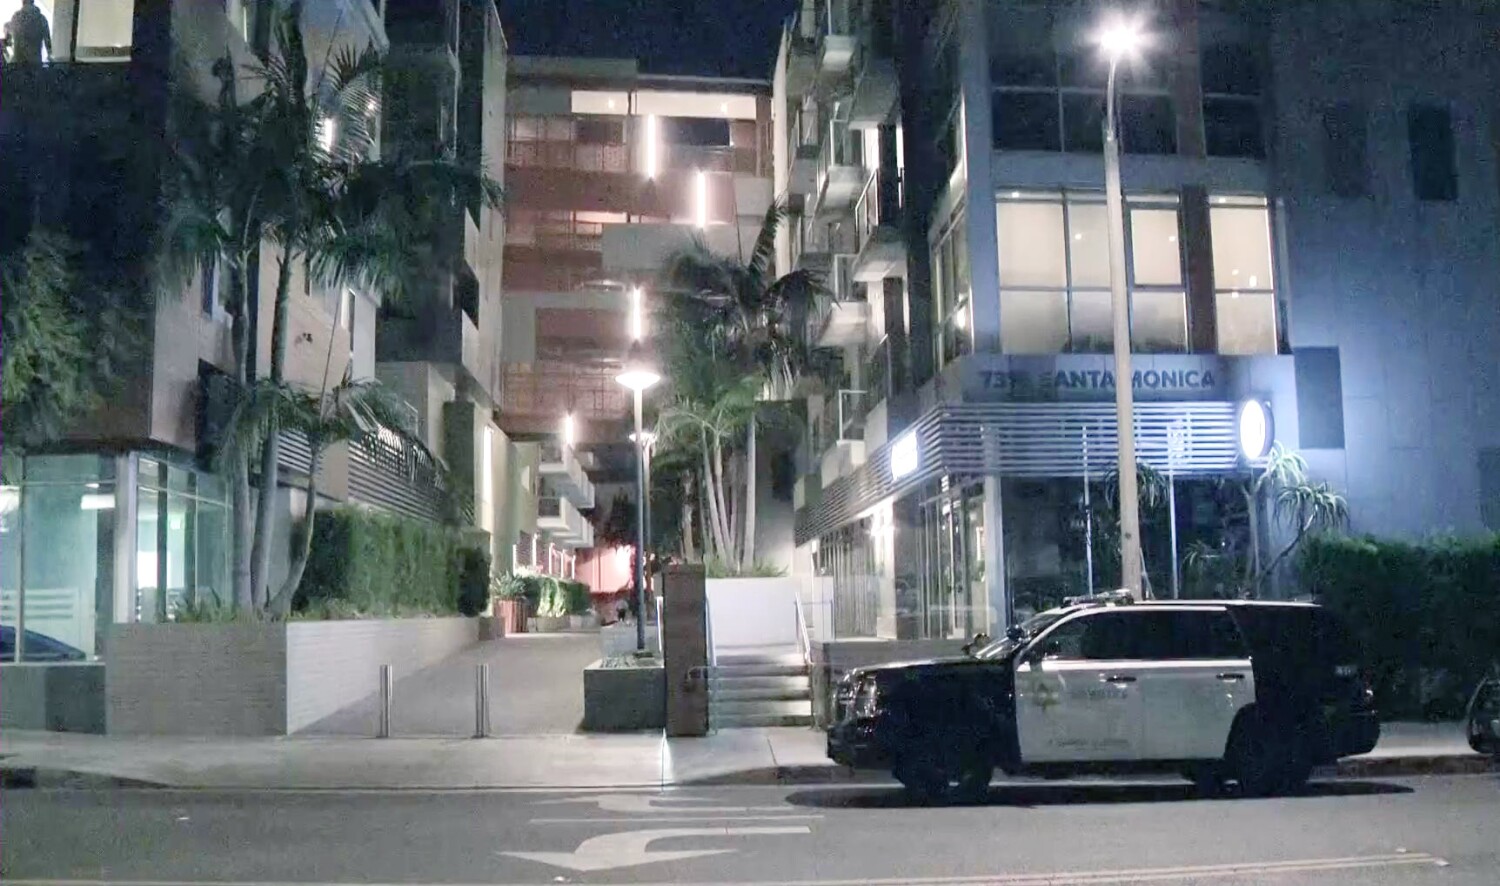 Woman fatally shot in West Hollywood apartment building